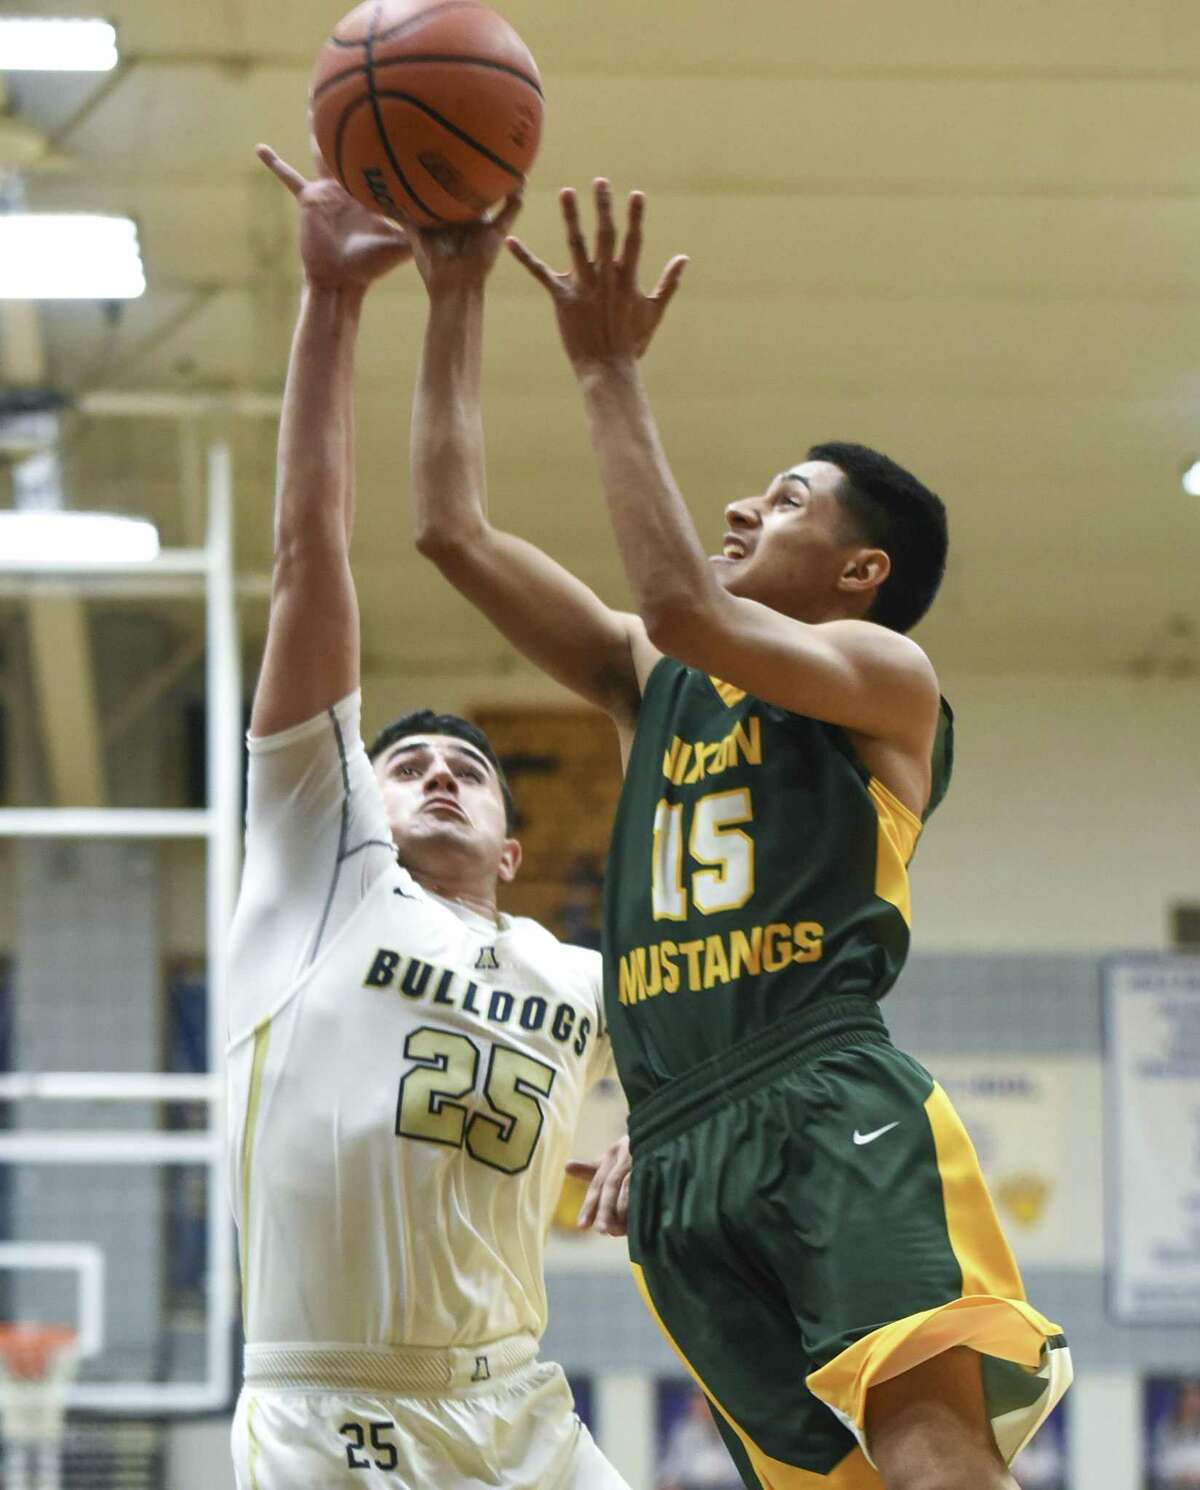 Jonathan Garcia hit a layup with two seconds remaining in regulation to force overtime then made the game winner in double overtime as Nixon won 89-87 at Alexander Tuesday.